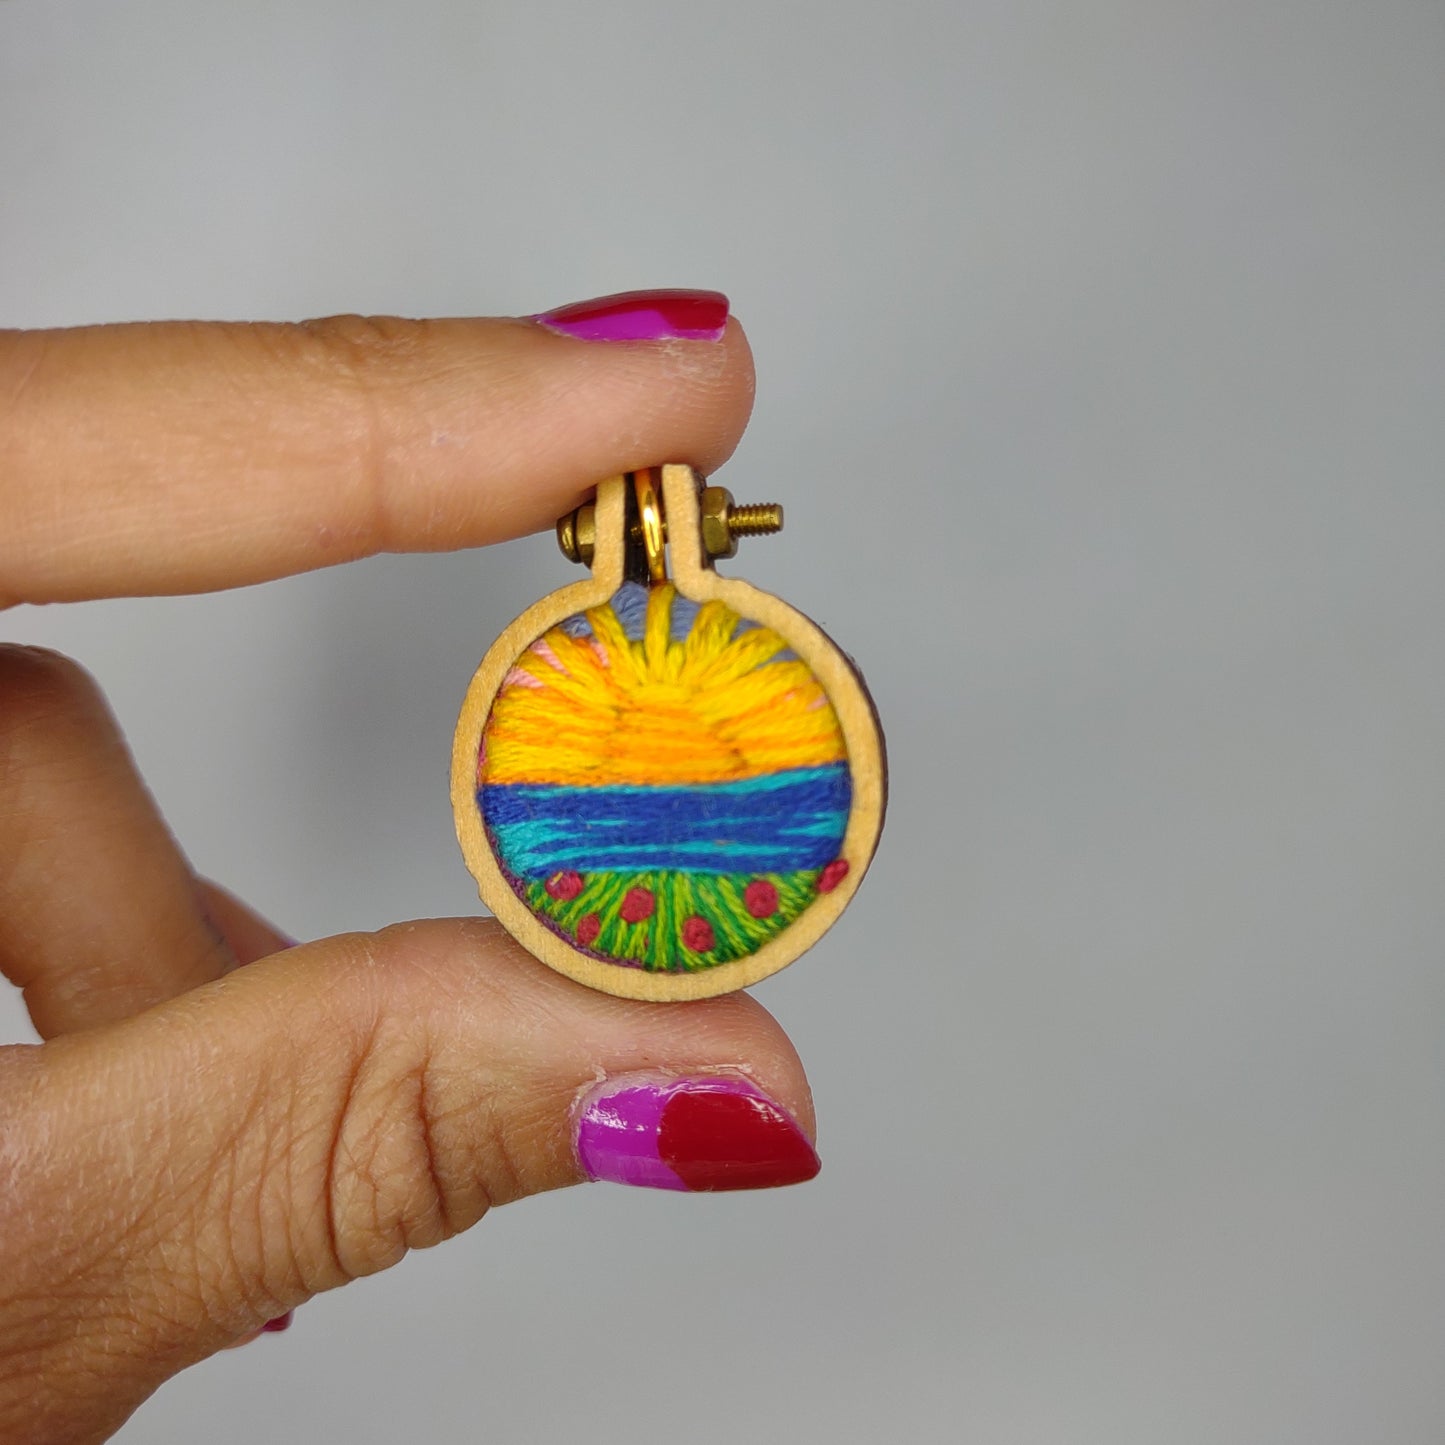 Handmade Embroidered Sunset by the Lake Flower Field Landscape Pendant Necklace